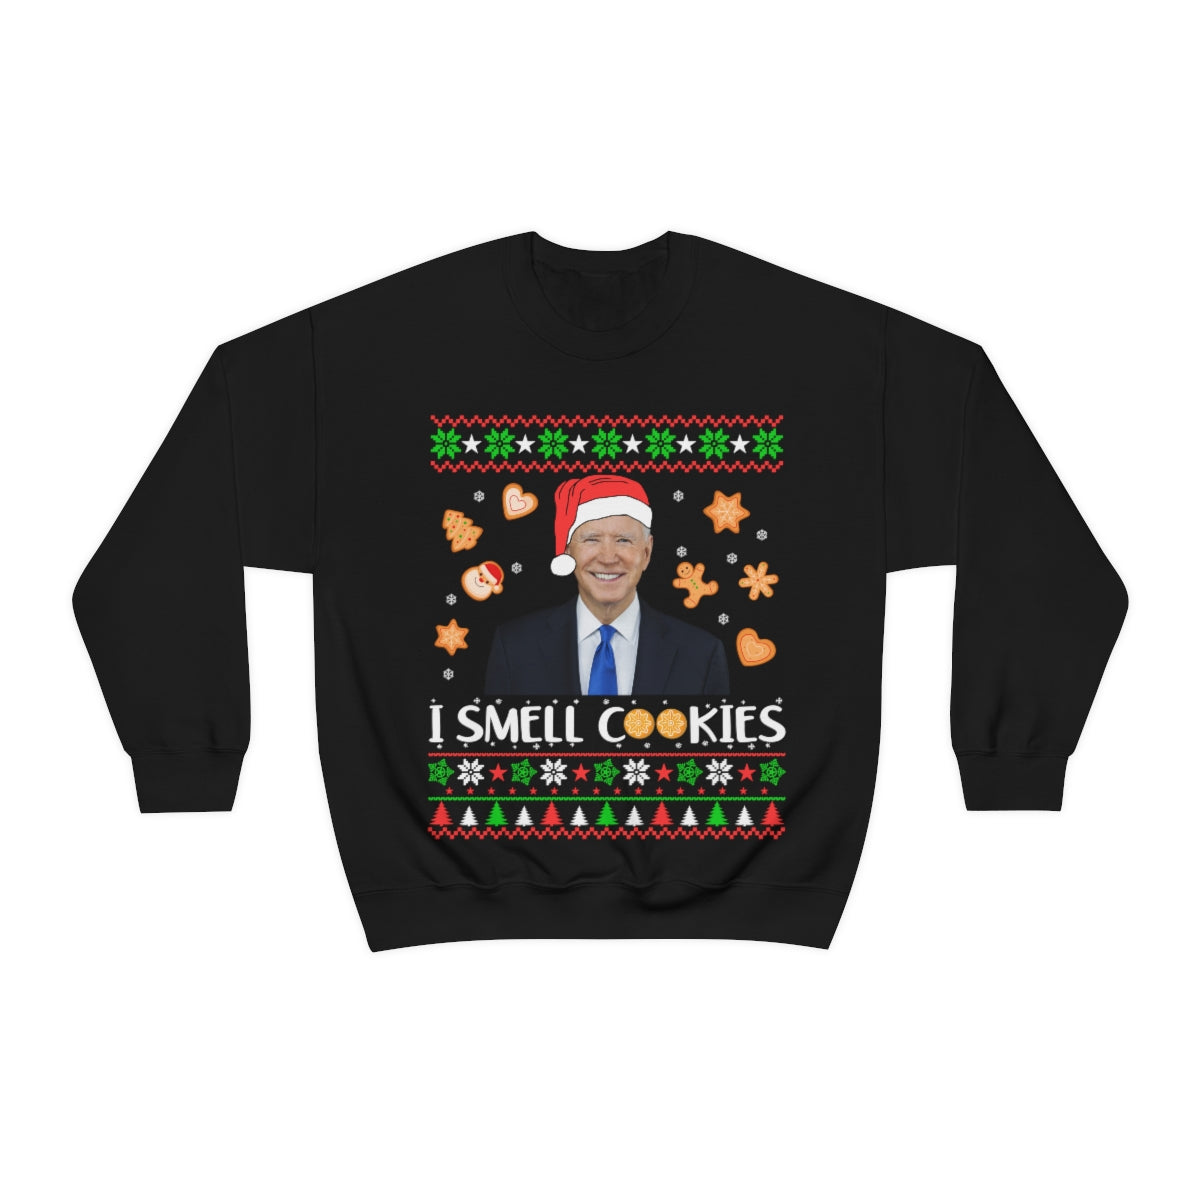 I Smell Cookies Christmas Sweater